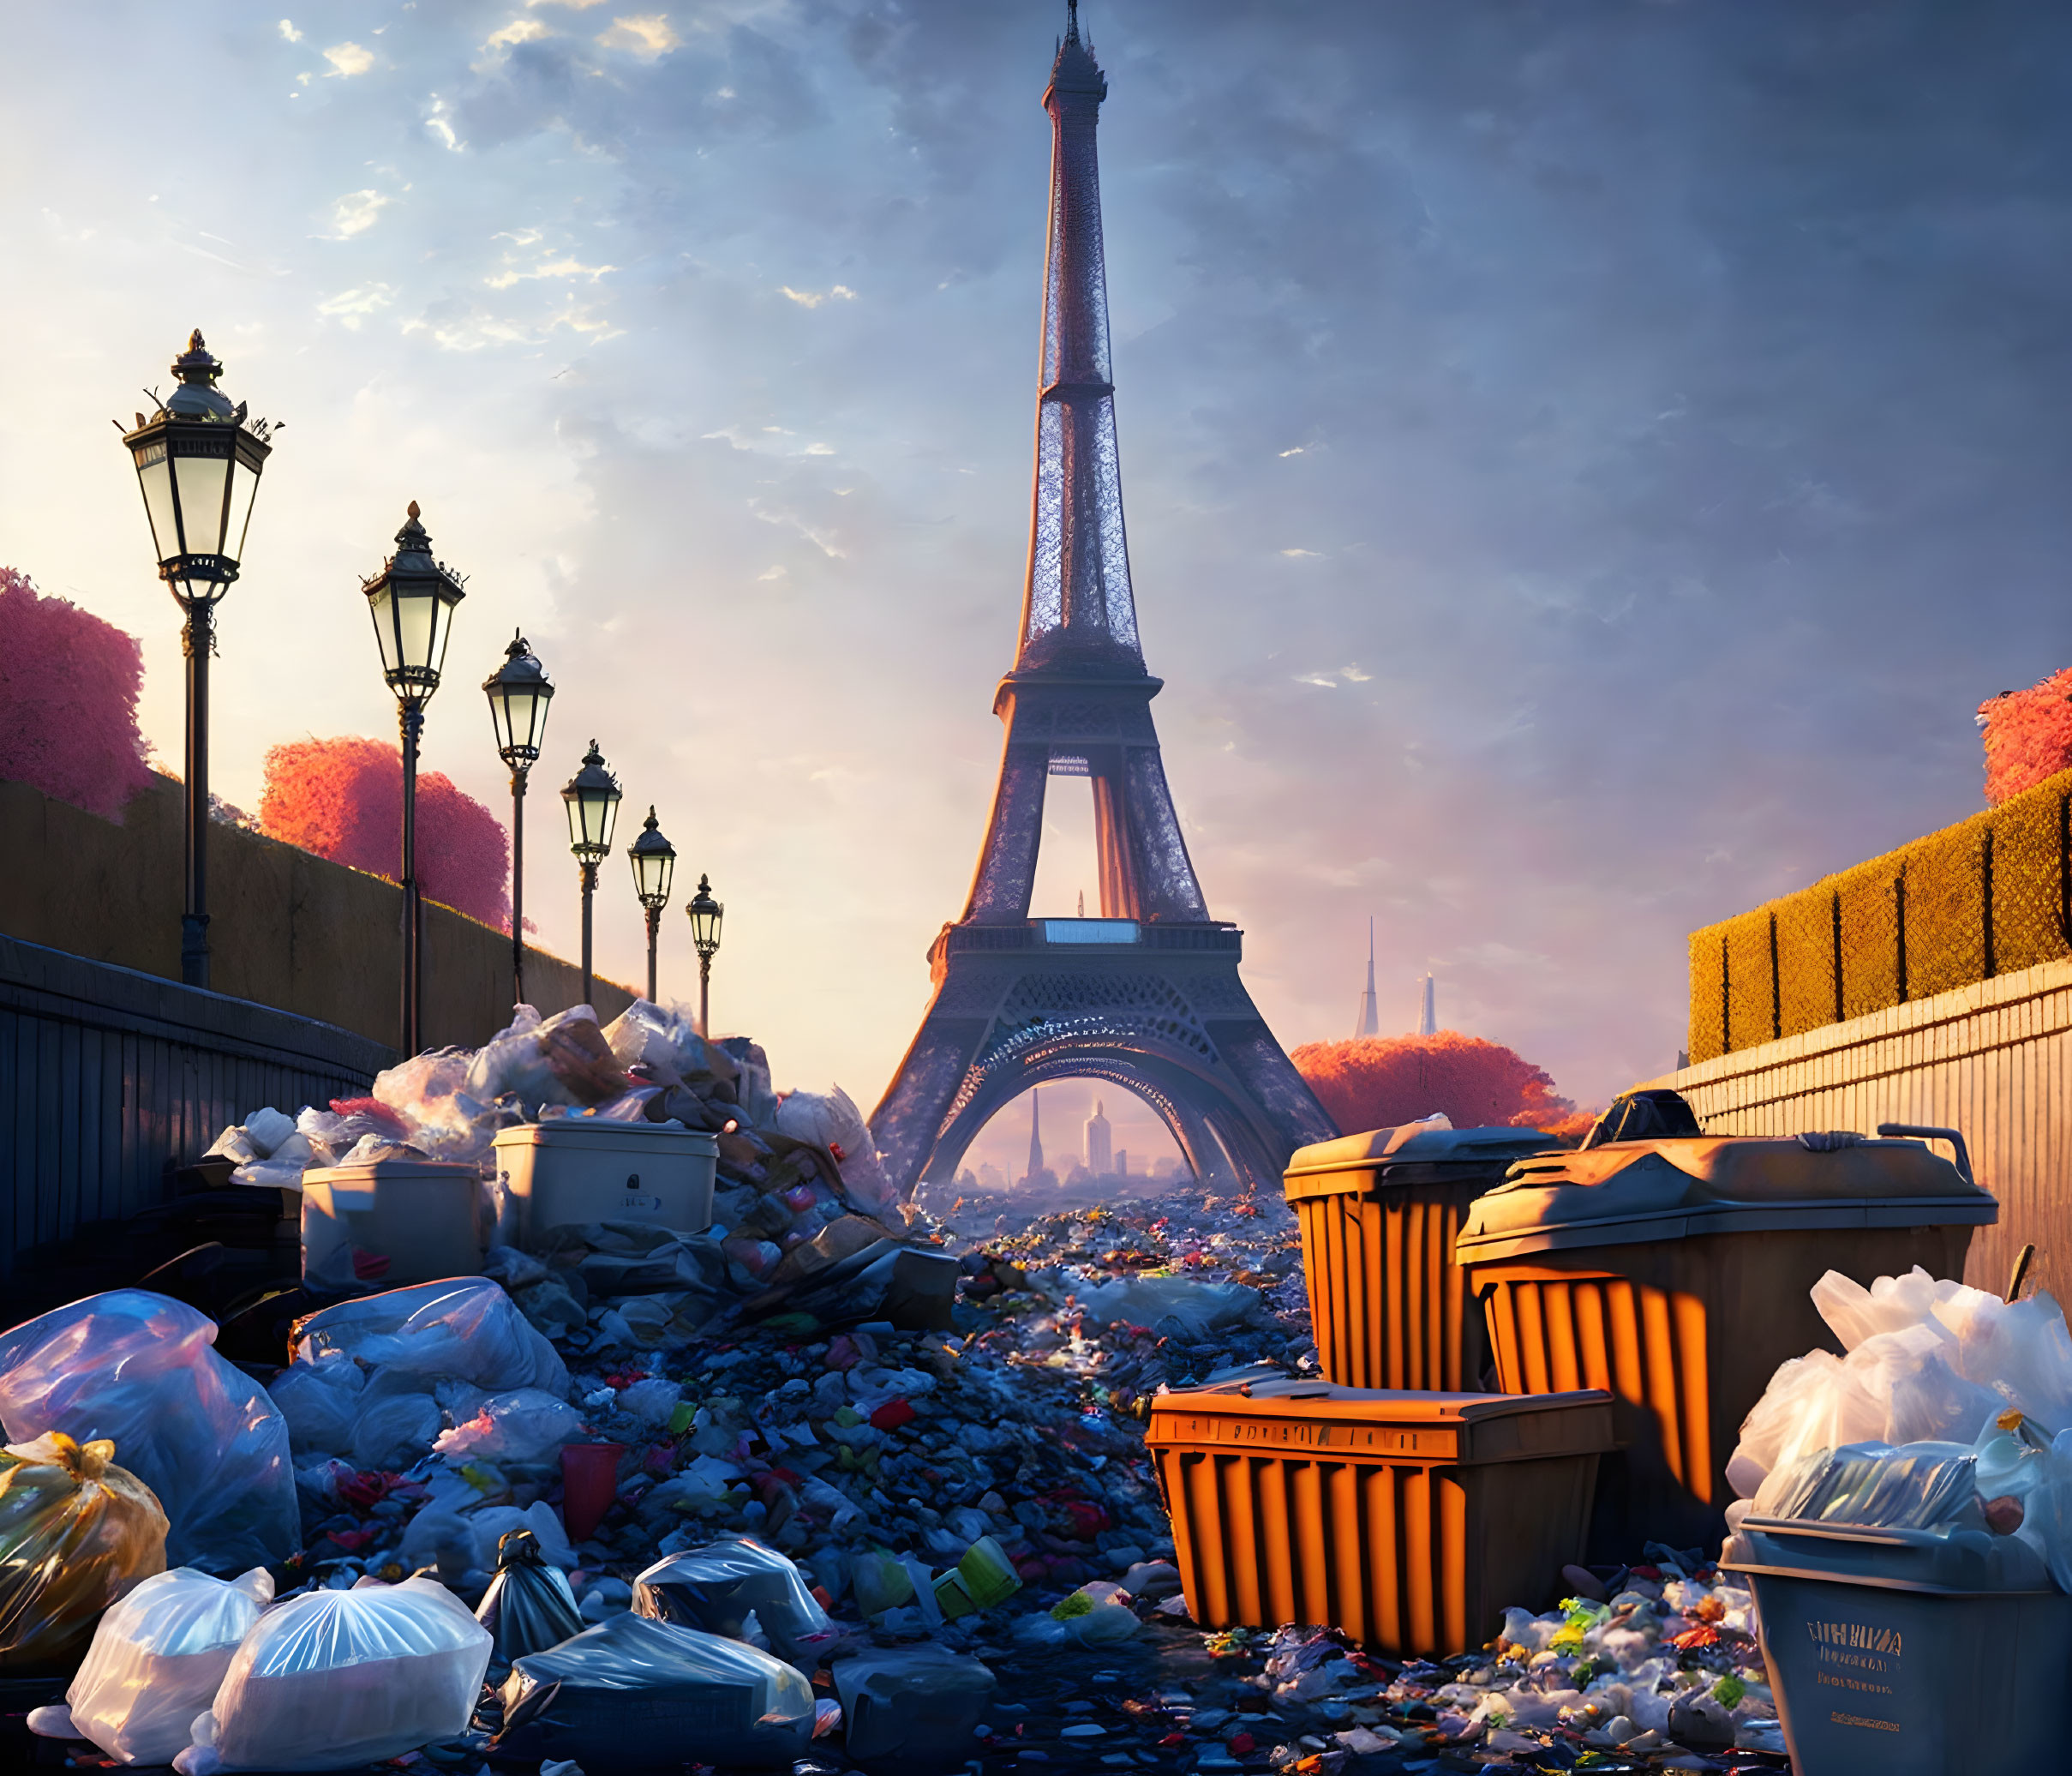 Eiffel Tower and Parisian street contrast with overflowing garbage